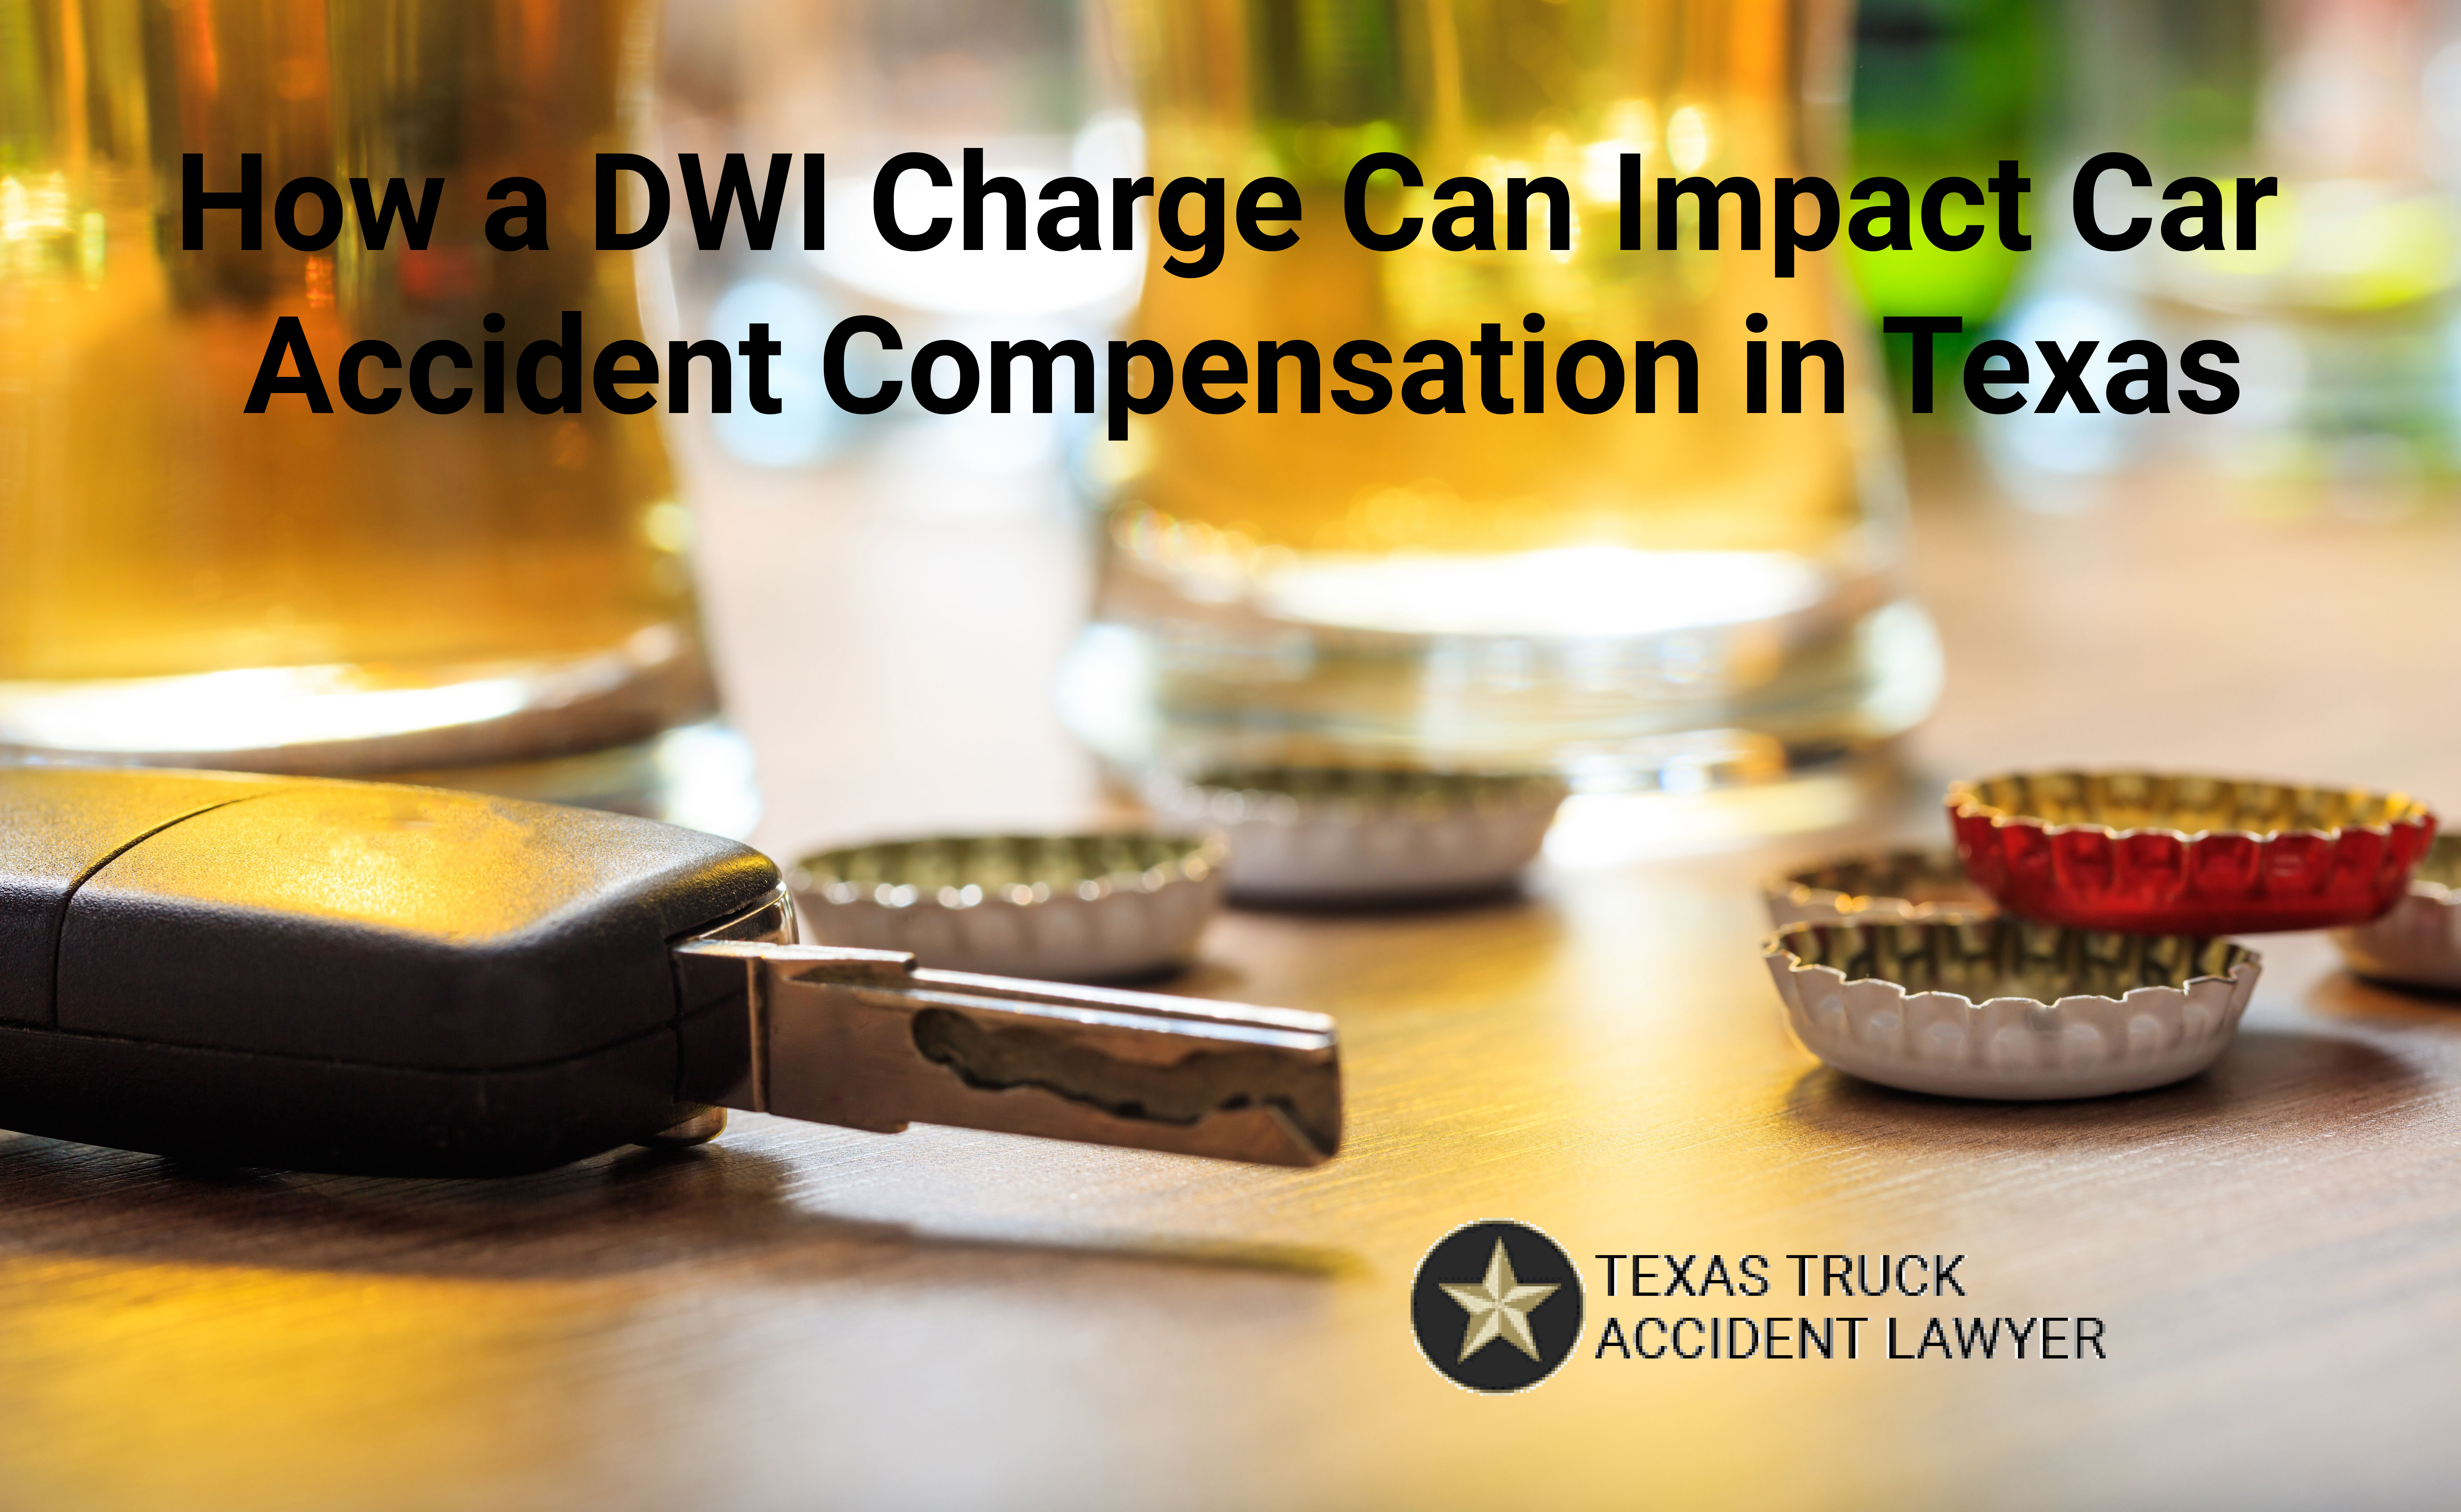 How DWI can impact compensation for a car accident in Texas